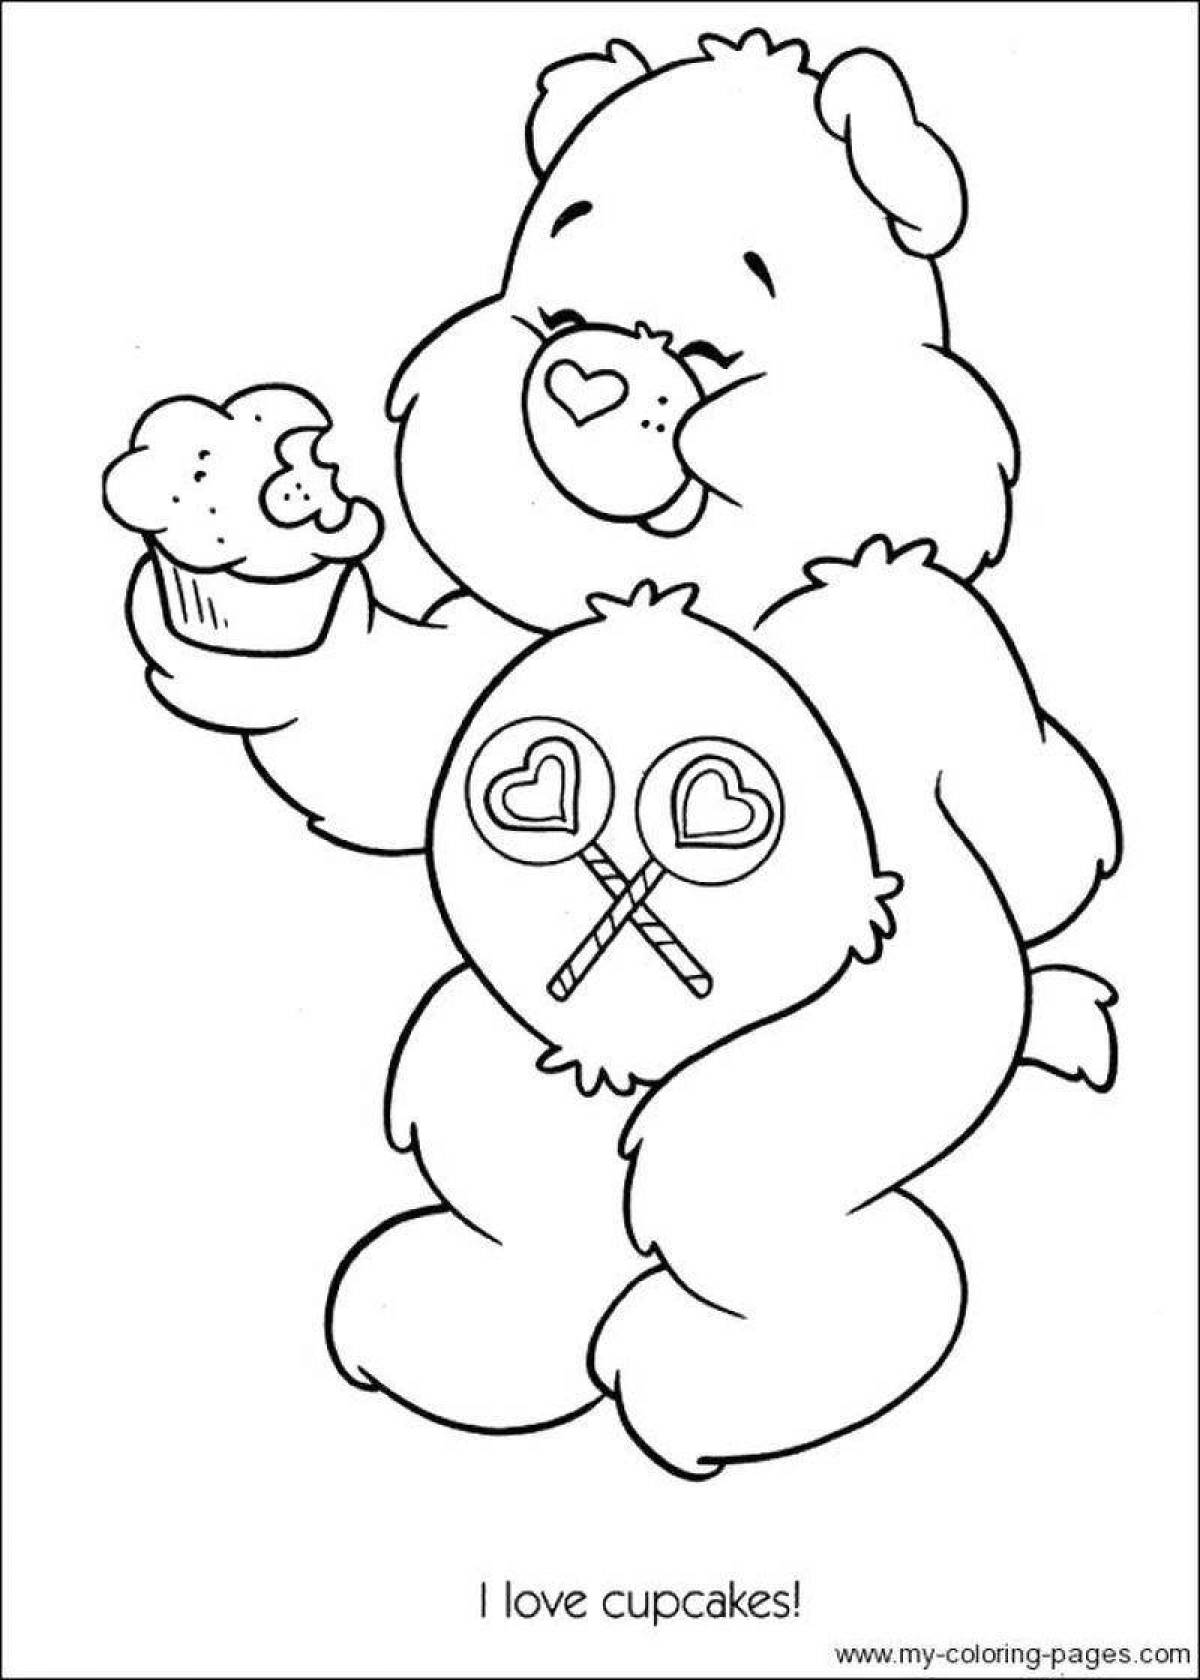 Awesome super bear coloring page